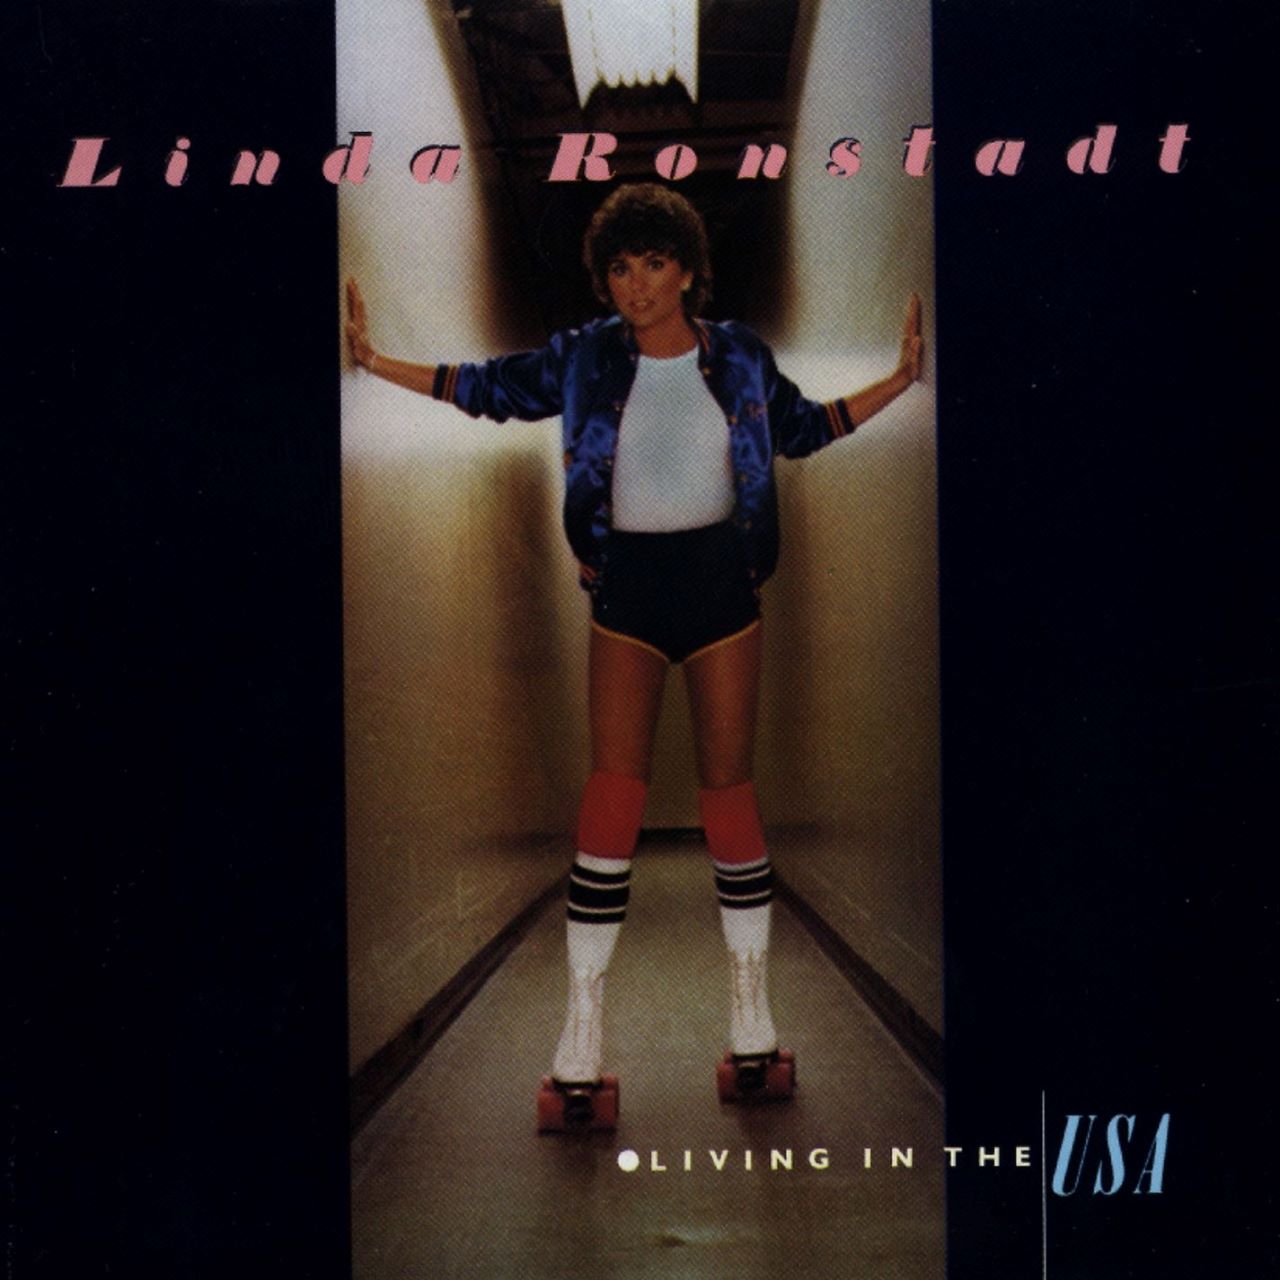 Linda Ronstadt - Living In The Usa cover album